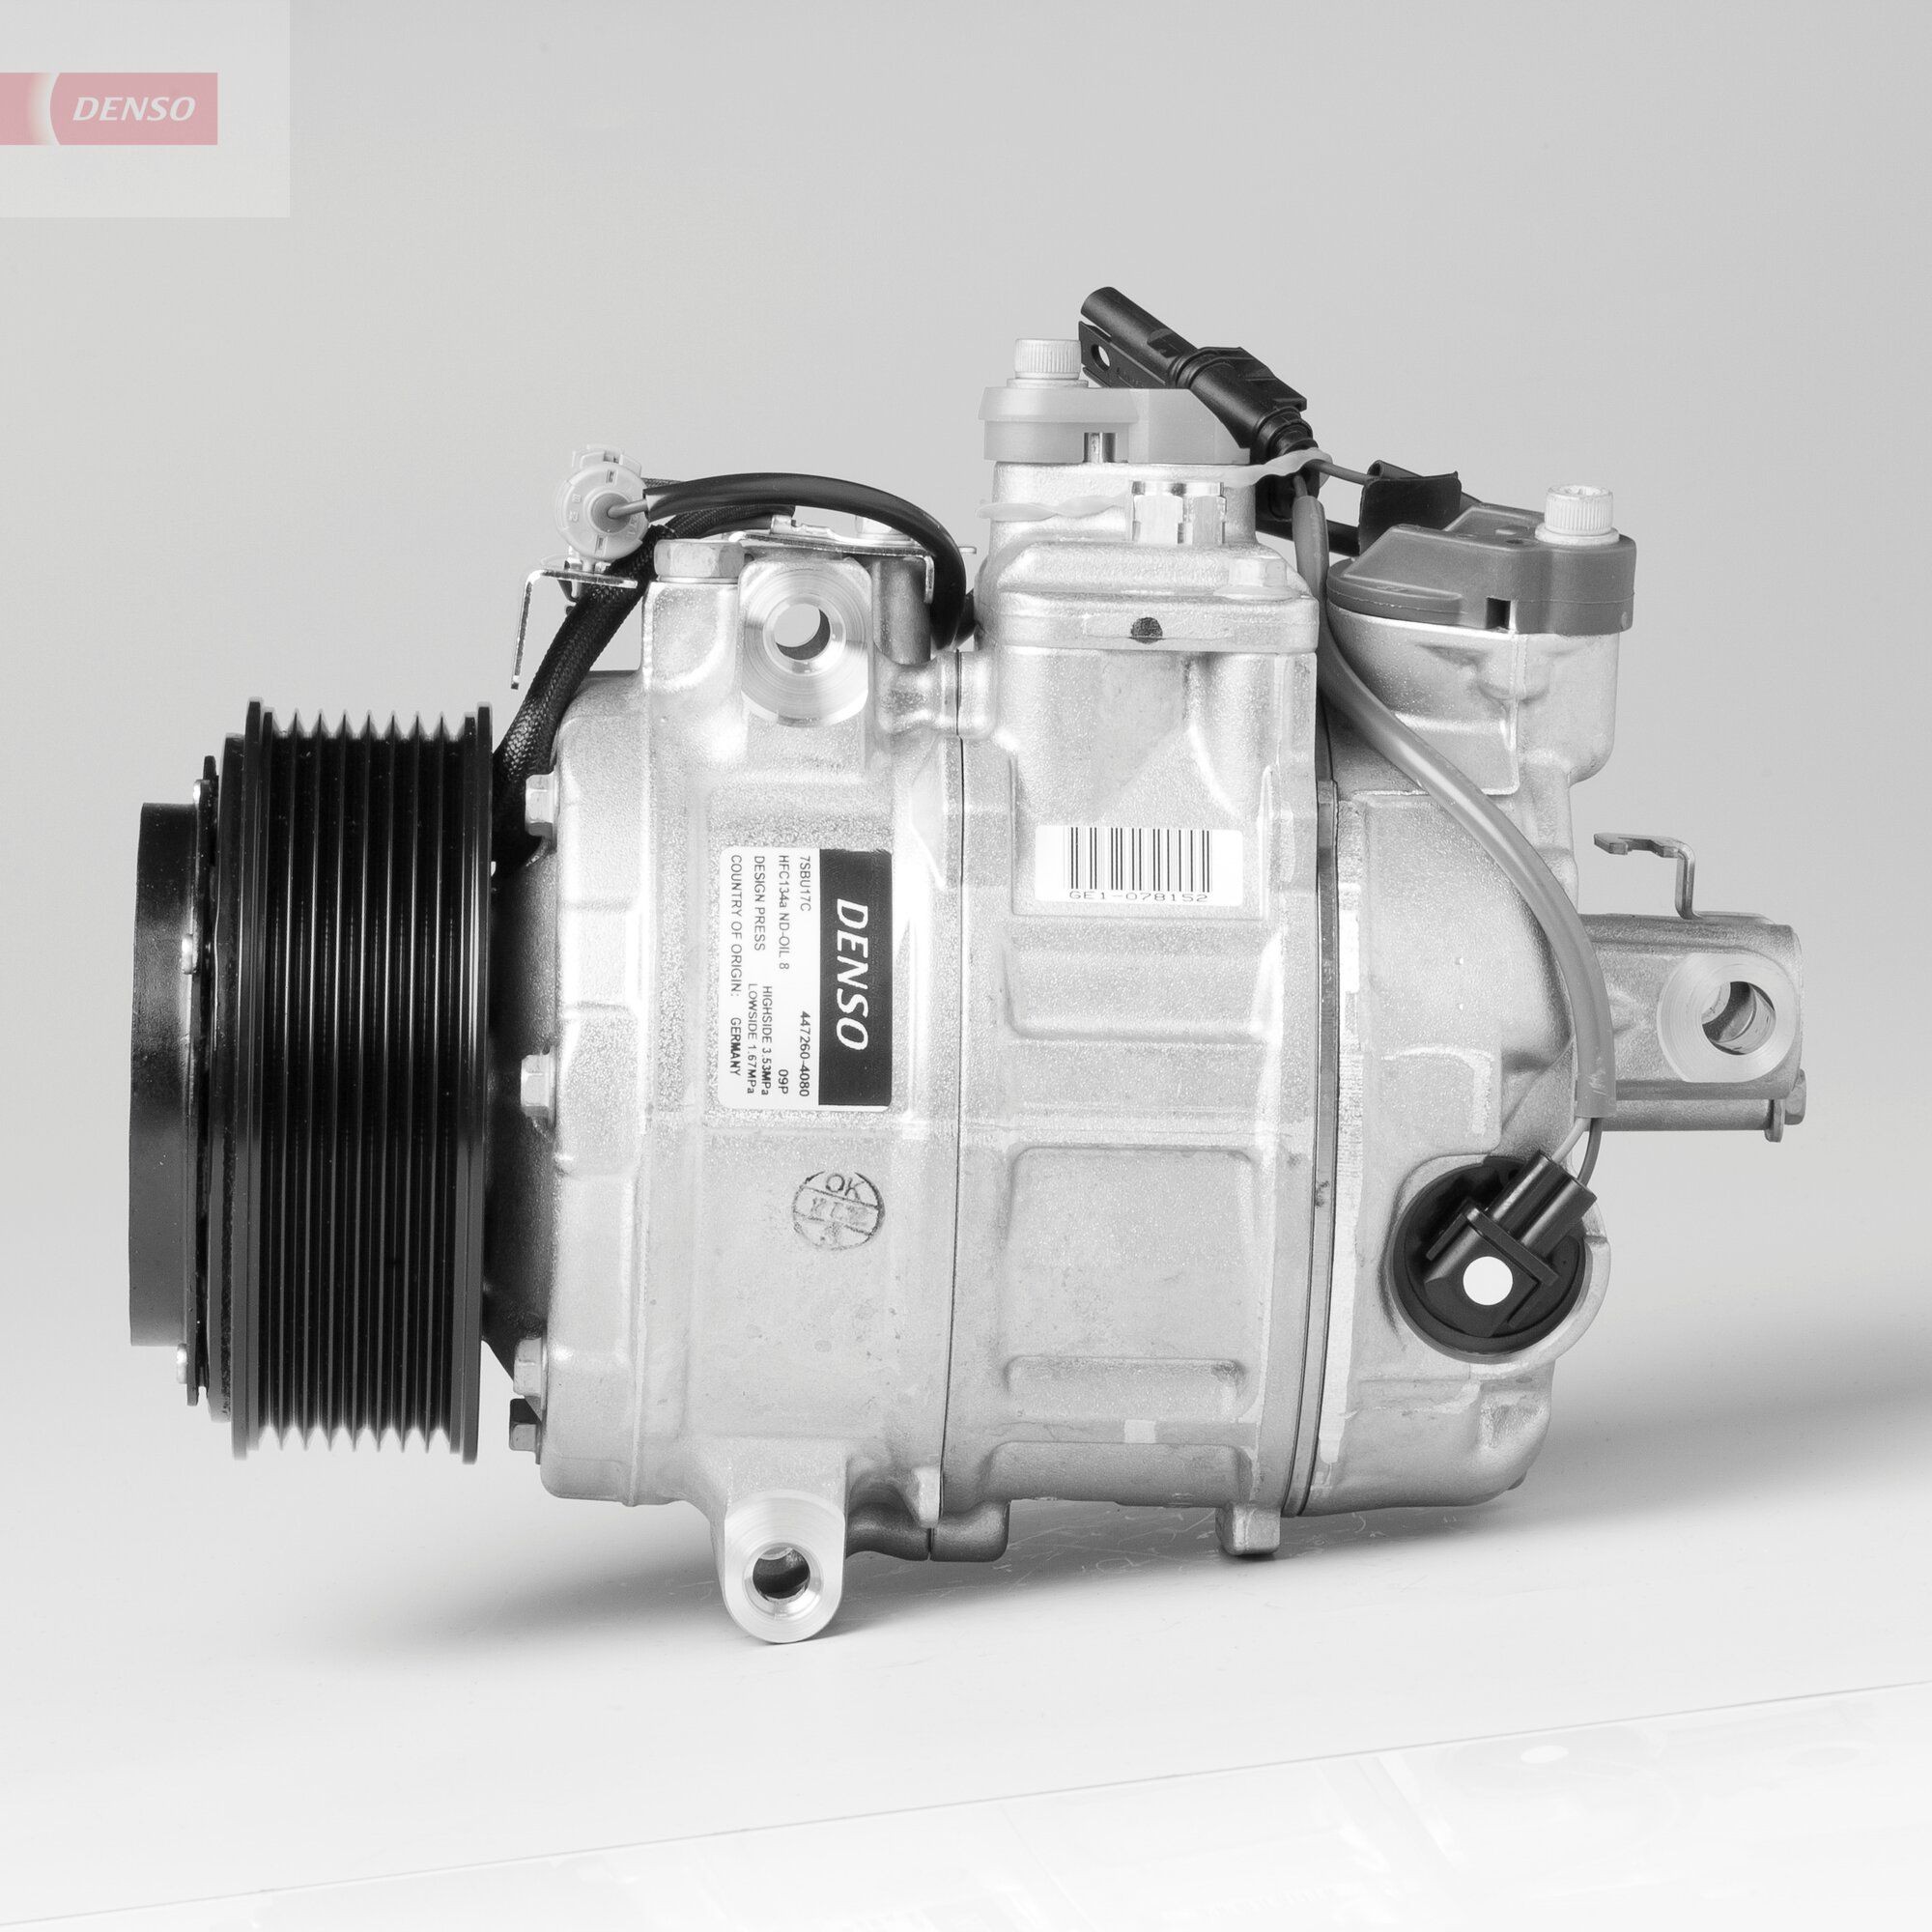 DENSO DCP05078 Air conditioning compressor 7SBU17C, 12V, PAG 46, R 134a, with magnetic clutch